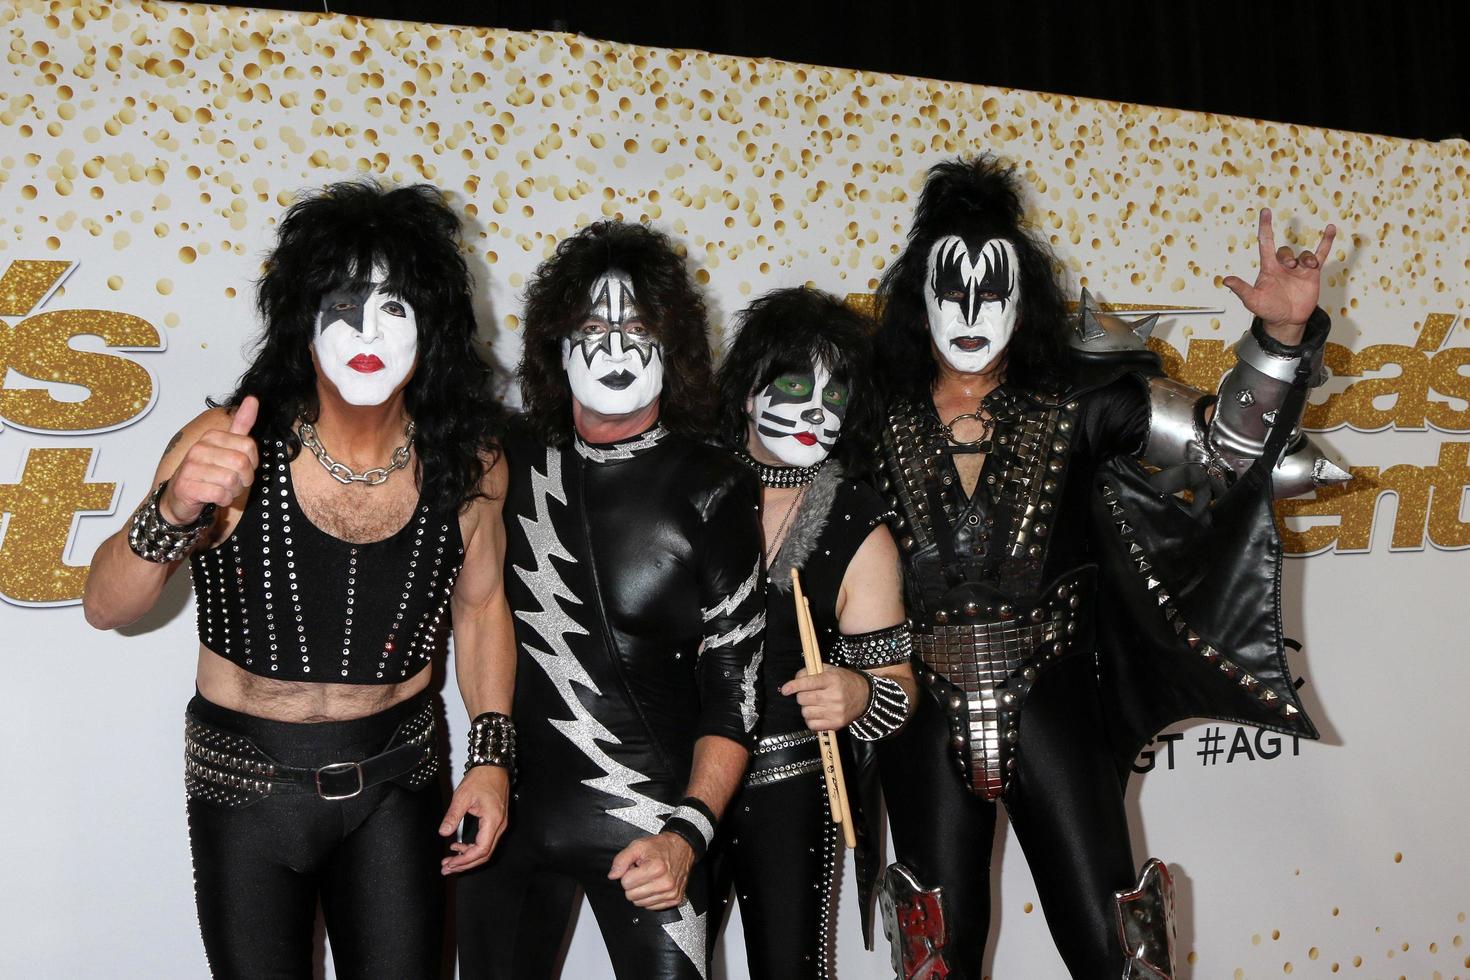 LOS ANGELES - SEP 19 - Paul Stanley, Tommy Thayer, Eric Singer, Gene Simmons, KISS at the America s Got Talent Crowns Winner Red Carpet at the Dolby Theater on September 19, 2018 in Los Angeles, CA photo